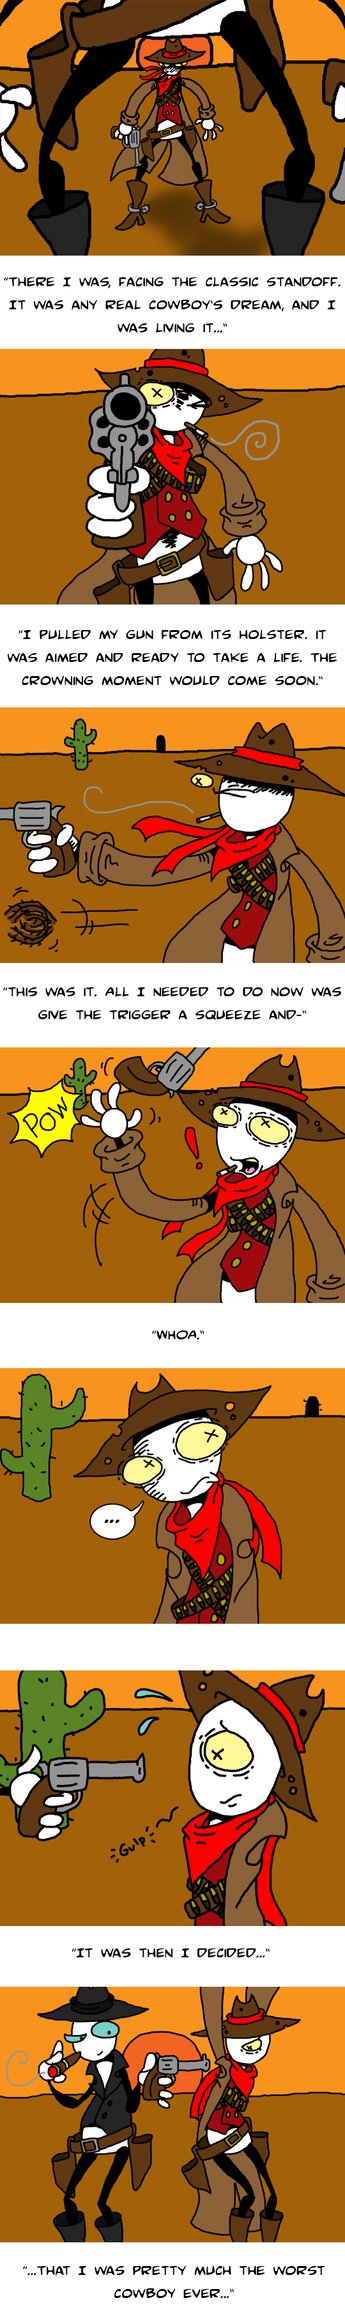 The worst cowboy ever by sirflammingofcorn